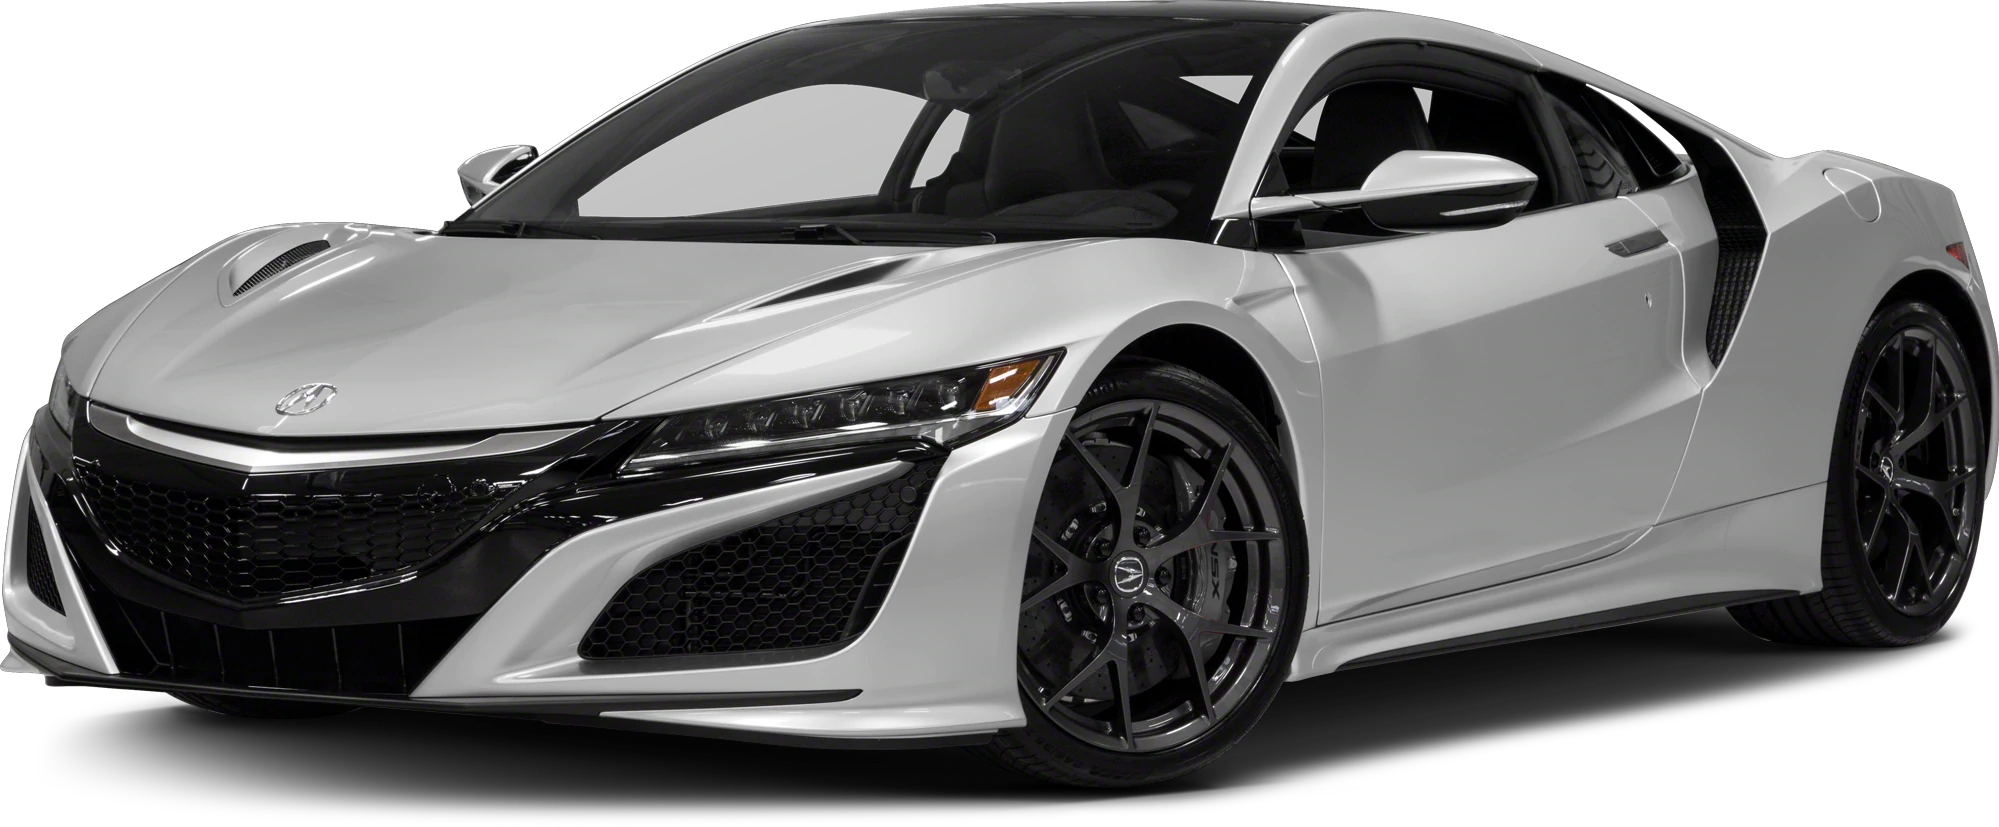 Nsx Acura PNG Image High Quality PNG Image